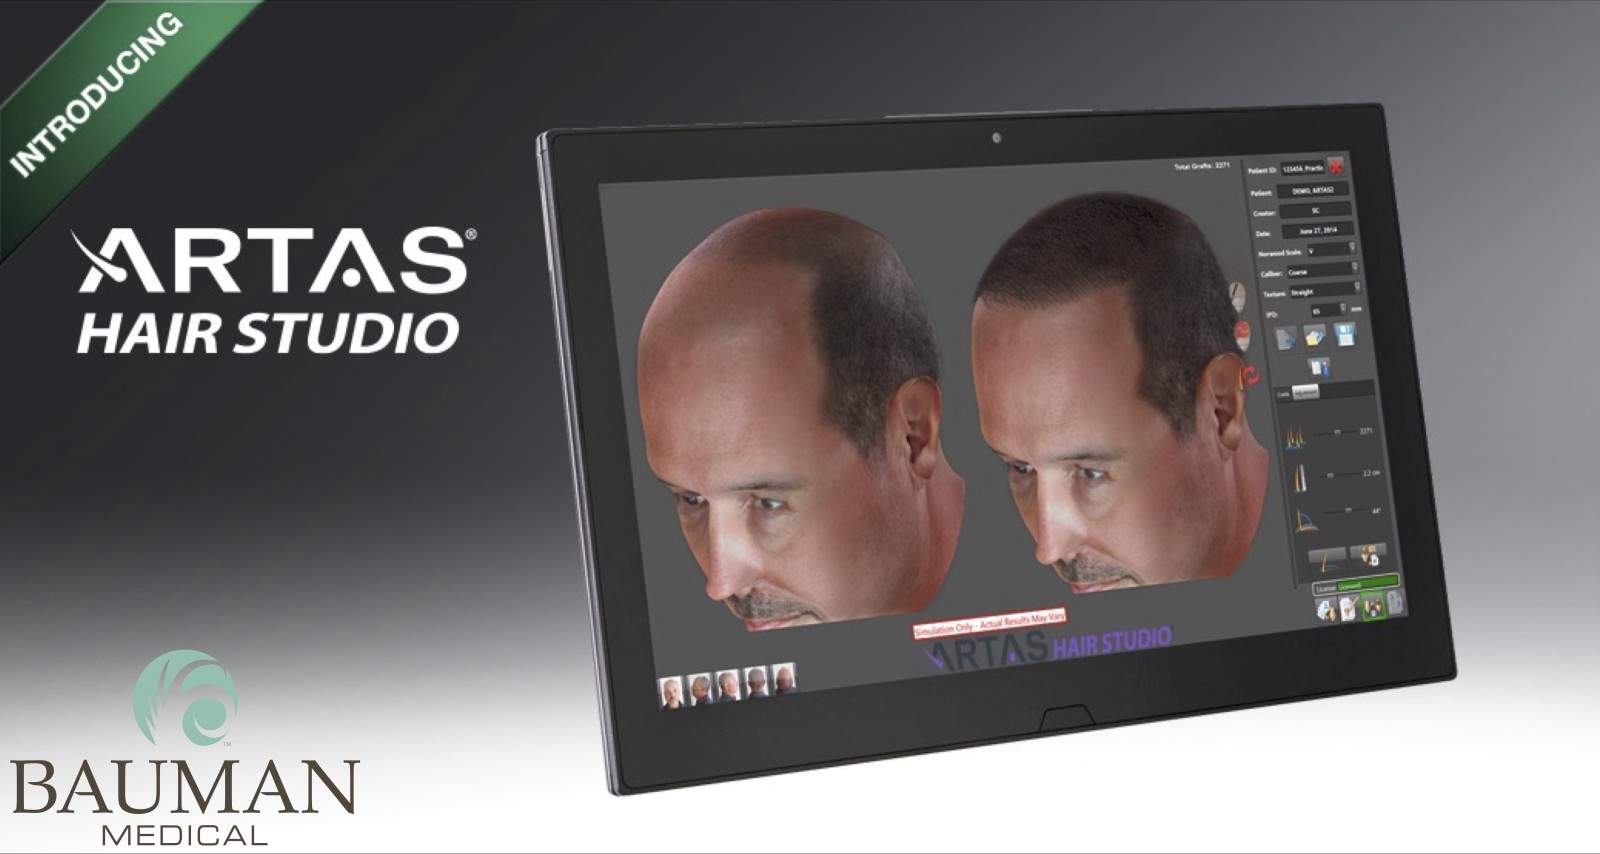 Now available at Bauman Medical in Boca Raton - ARTAS Robotic-assisted hair transplants.